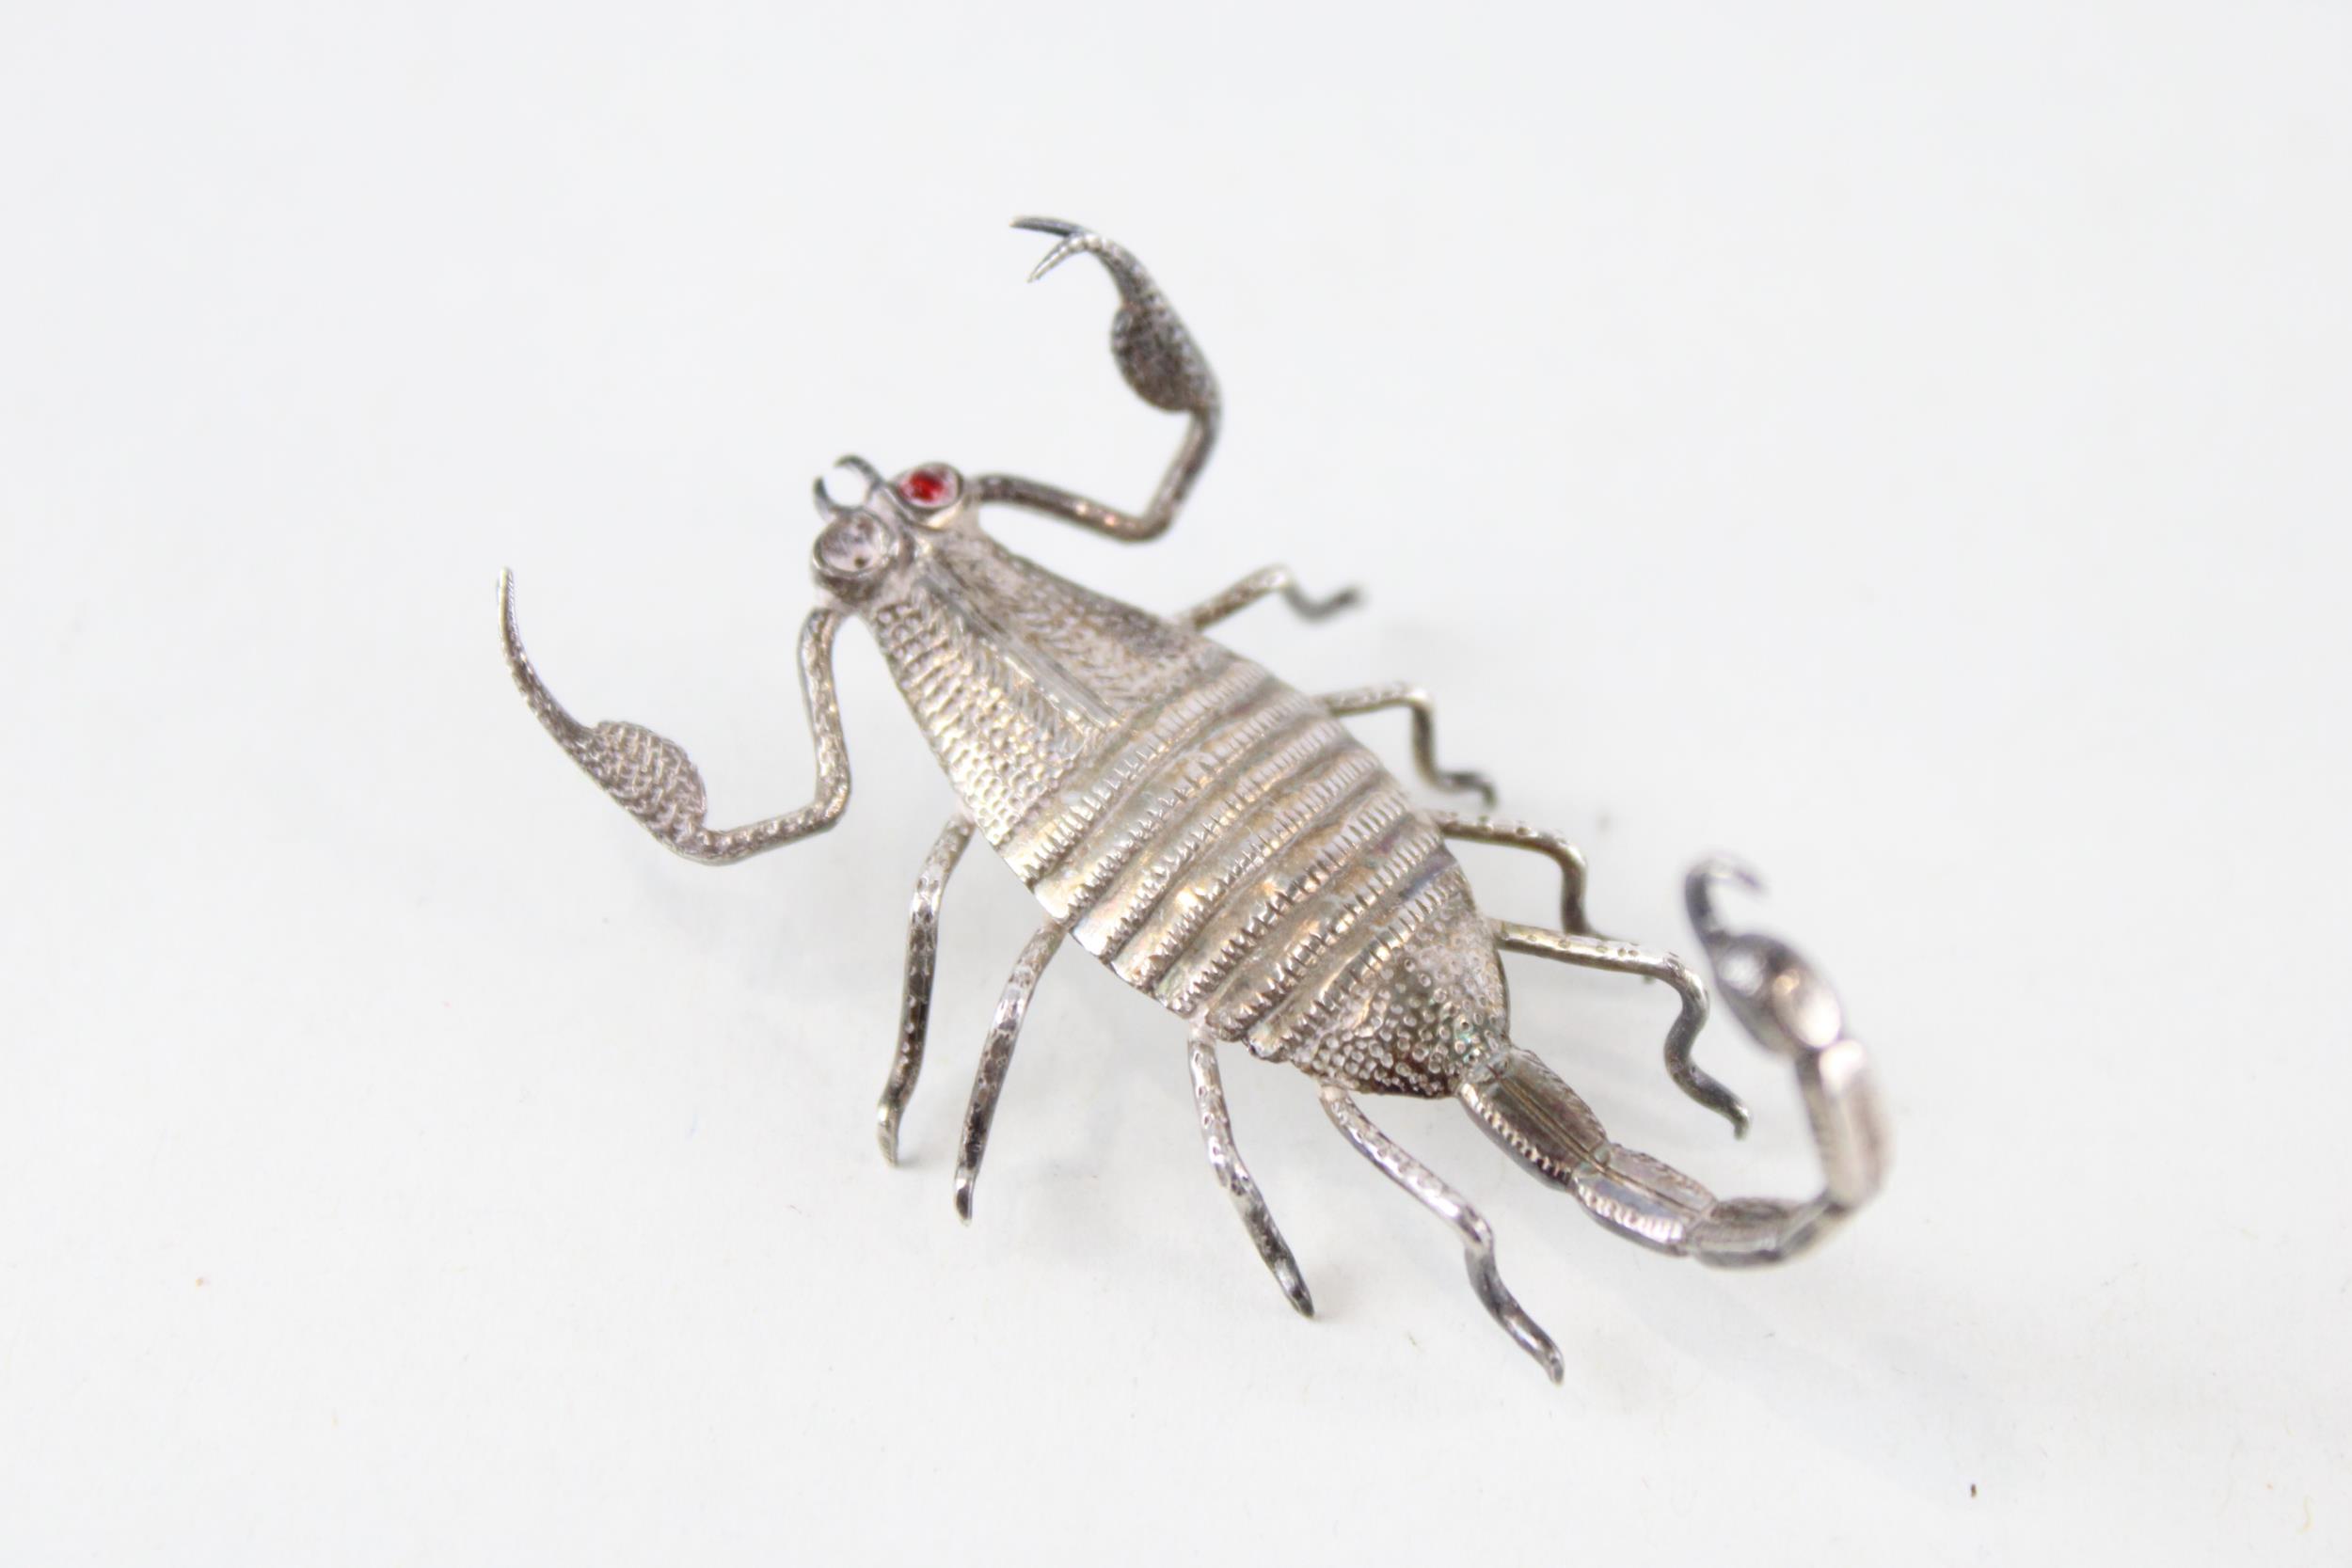 Antique / Vintage .950 SILVER Scorpion Hair Accessory / Figurine (6g) // Length - 5.2cm XRF TESTED - Image 4 of 5